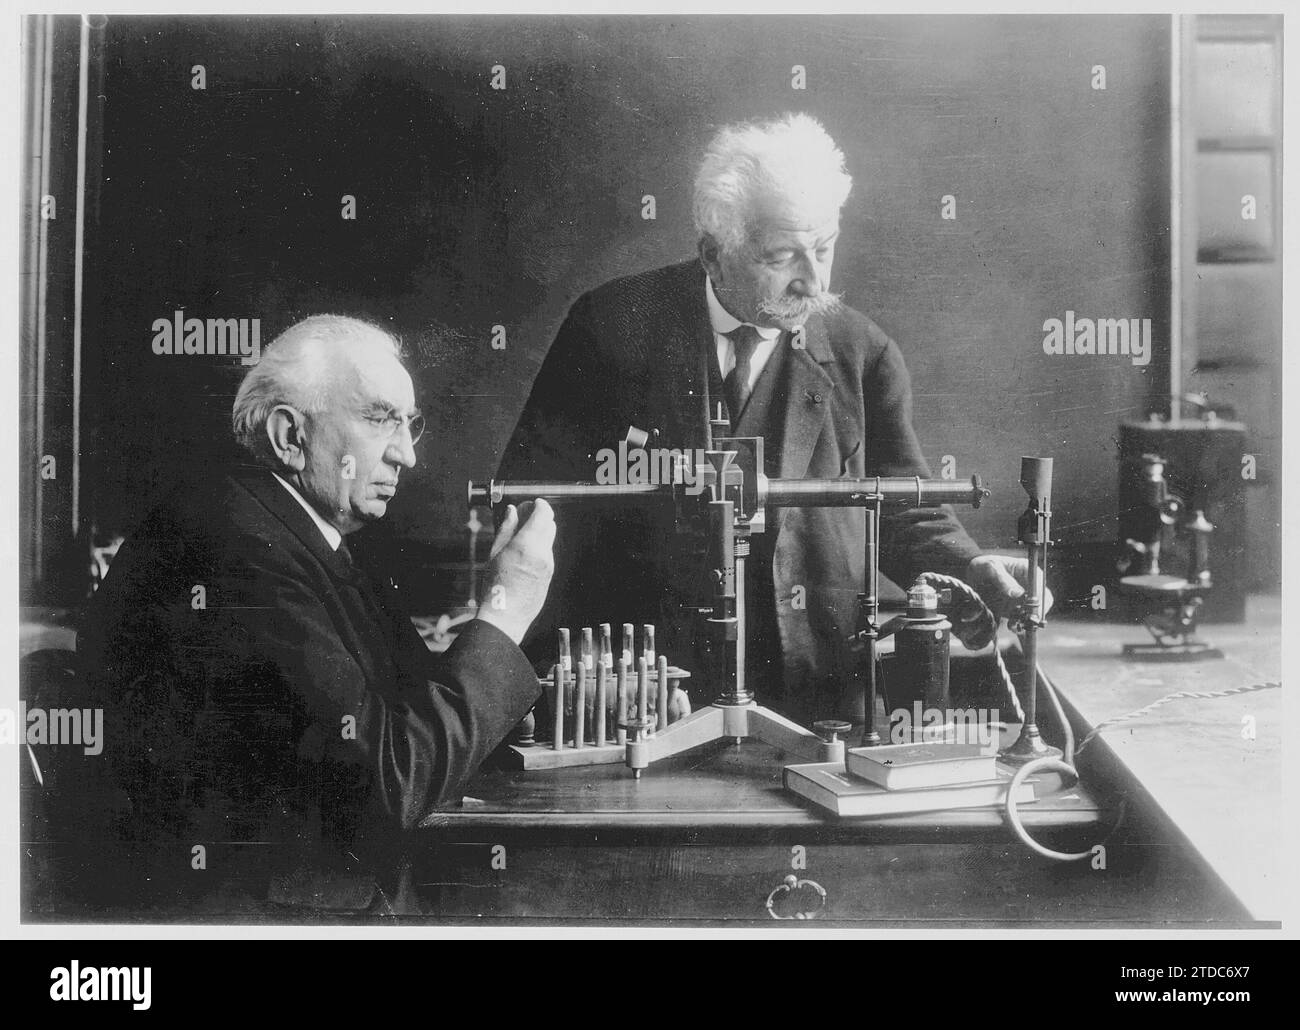 12/31/1929. The Lumière Brothers in their Laboratory. On the left Louis, on the right Auguste. Credit: Album / Archivo ABC Stock Photo